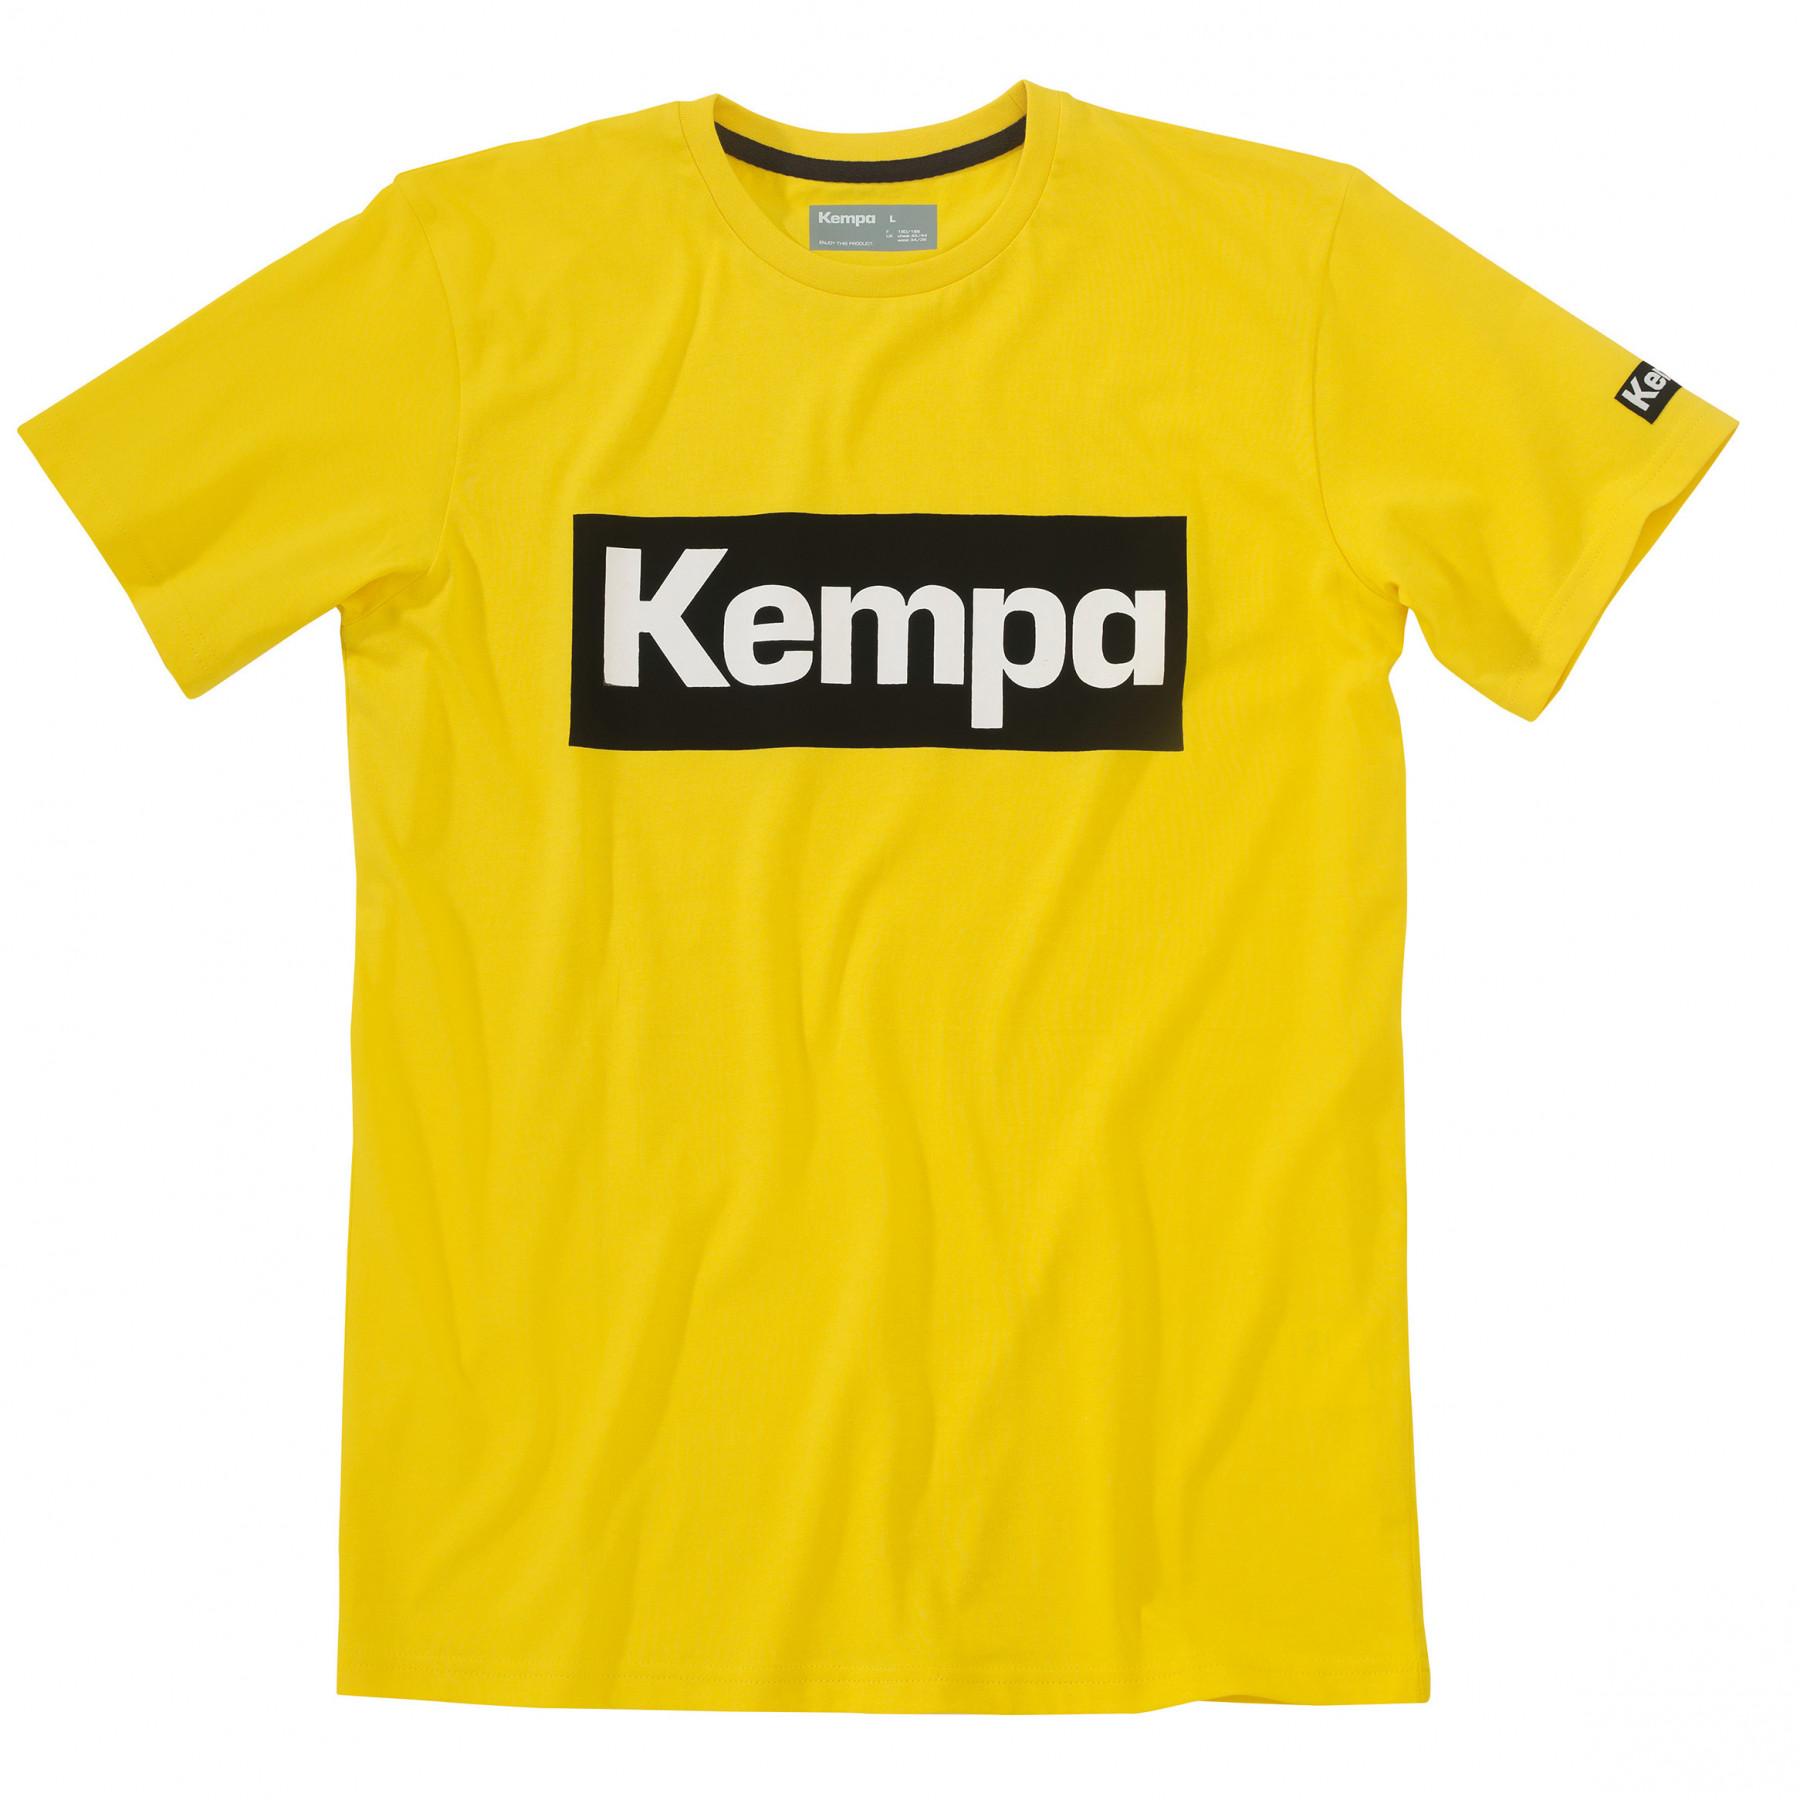 Details about   Kempa Sports Training Casual Cotton Womens Ladies Short Sleeve SS T-Shirt Tee 